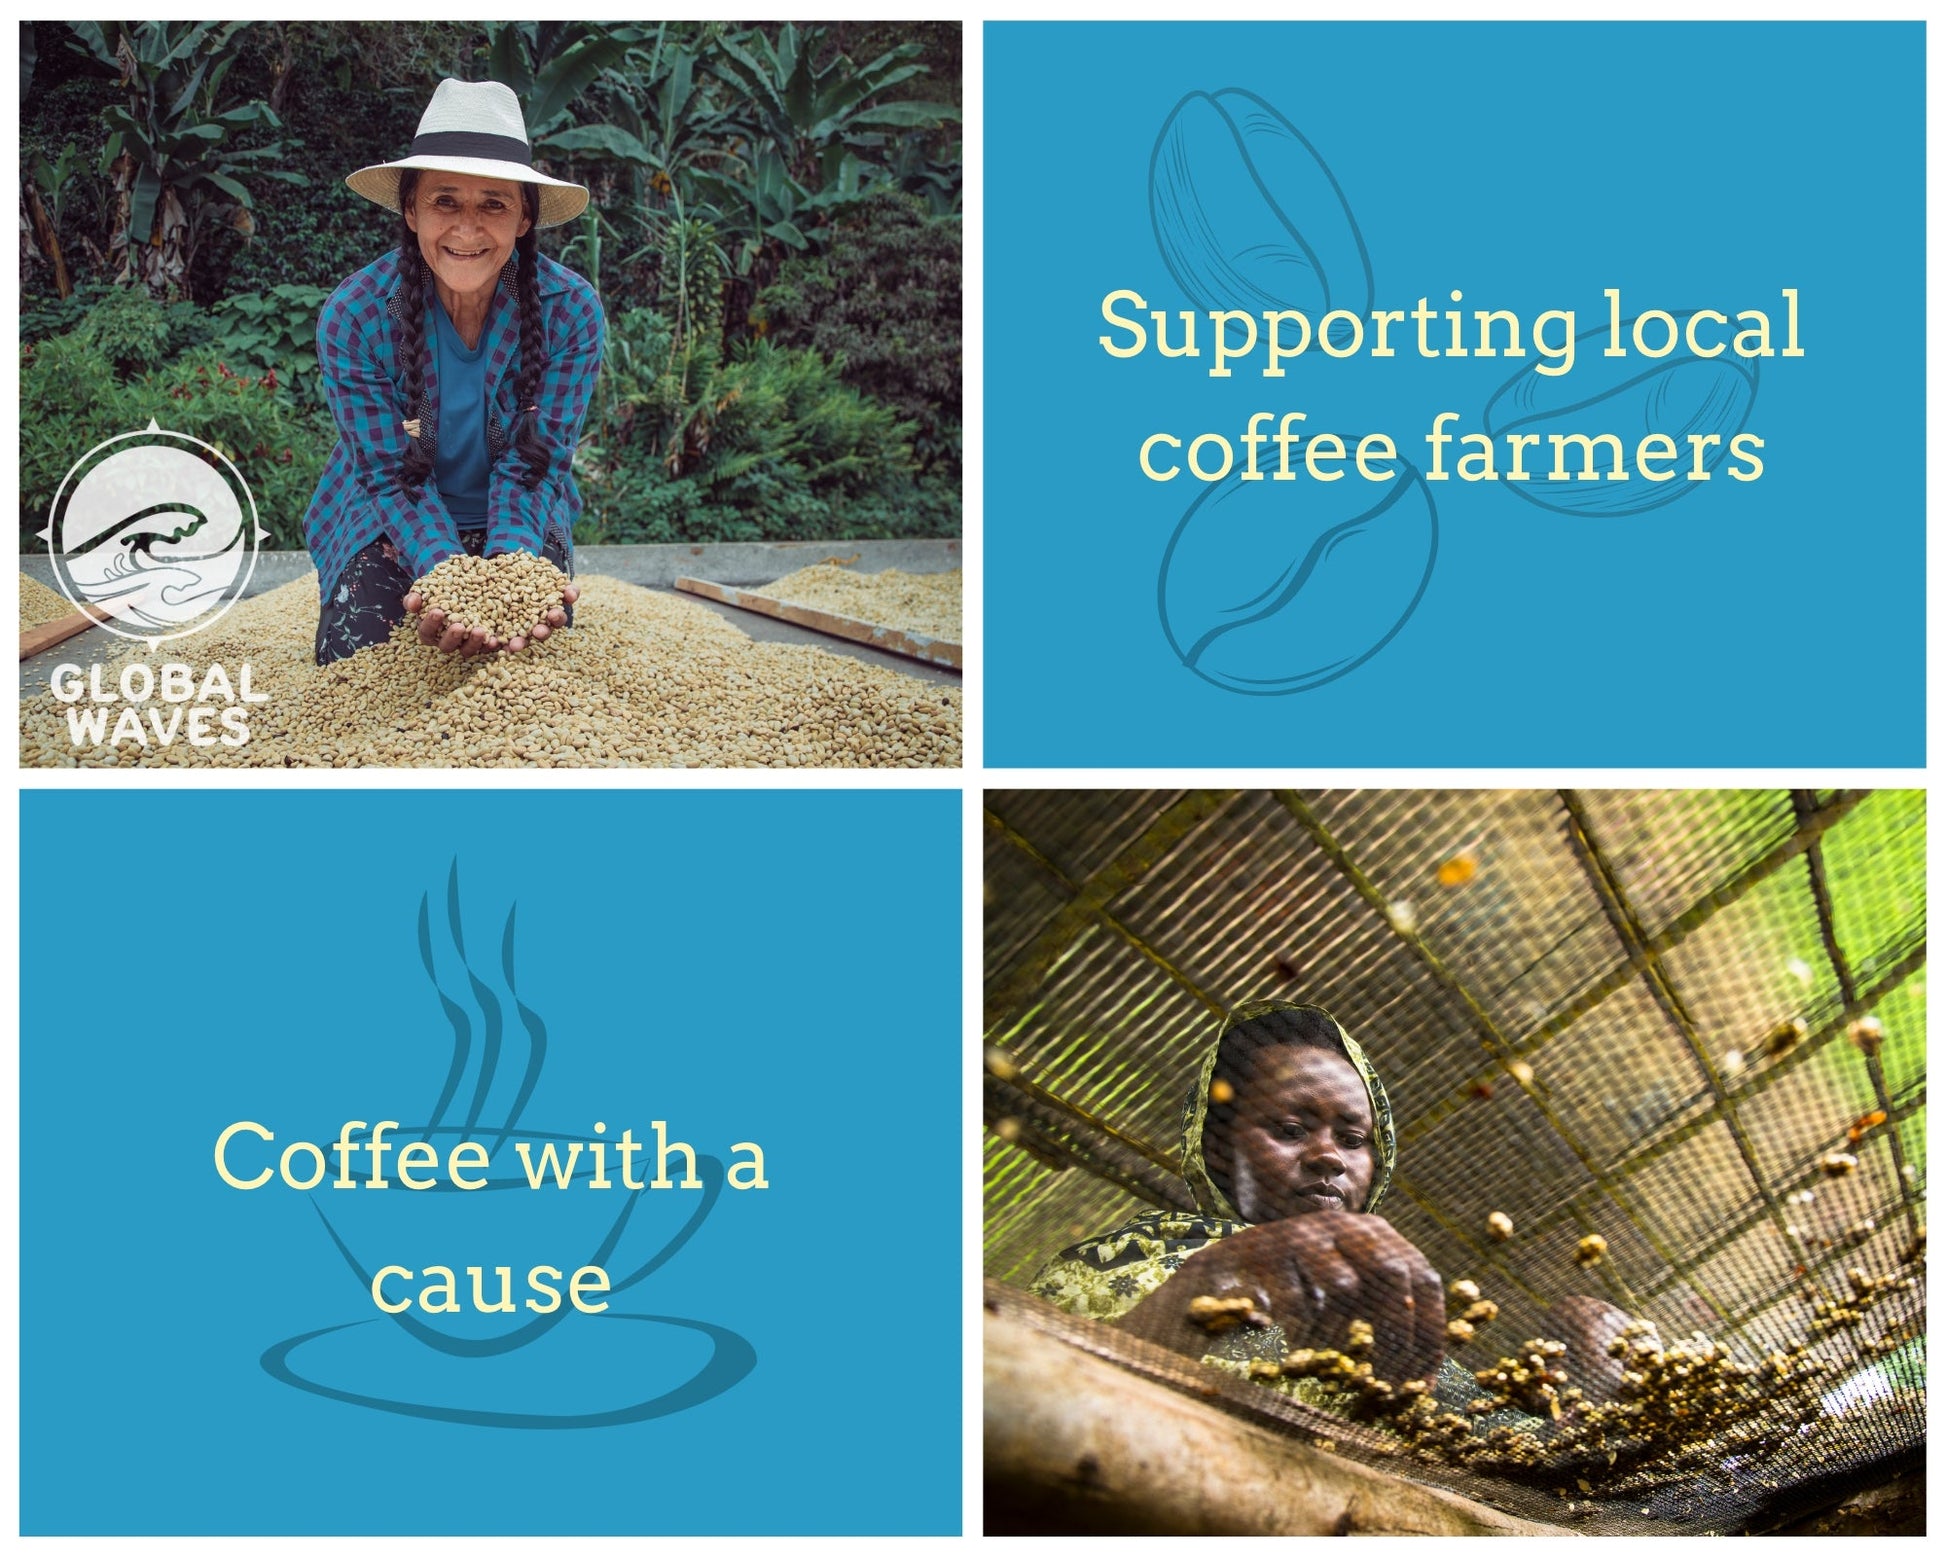 The Global Waves Hammerhead Blend supports local farms in Guatemala and Ethiopia. We're proud to support these impressive farmers, as well as their families and communities.